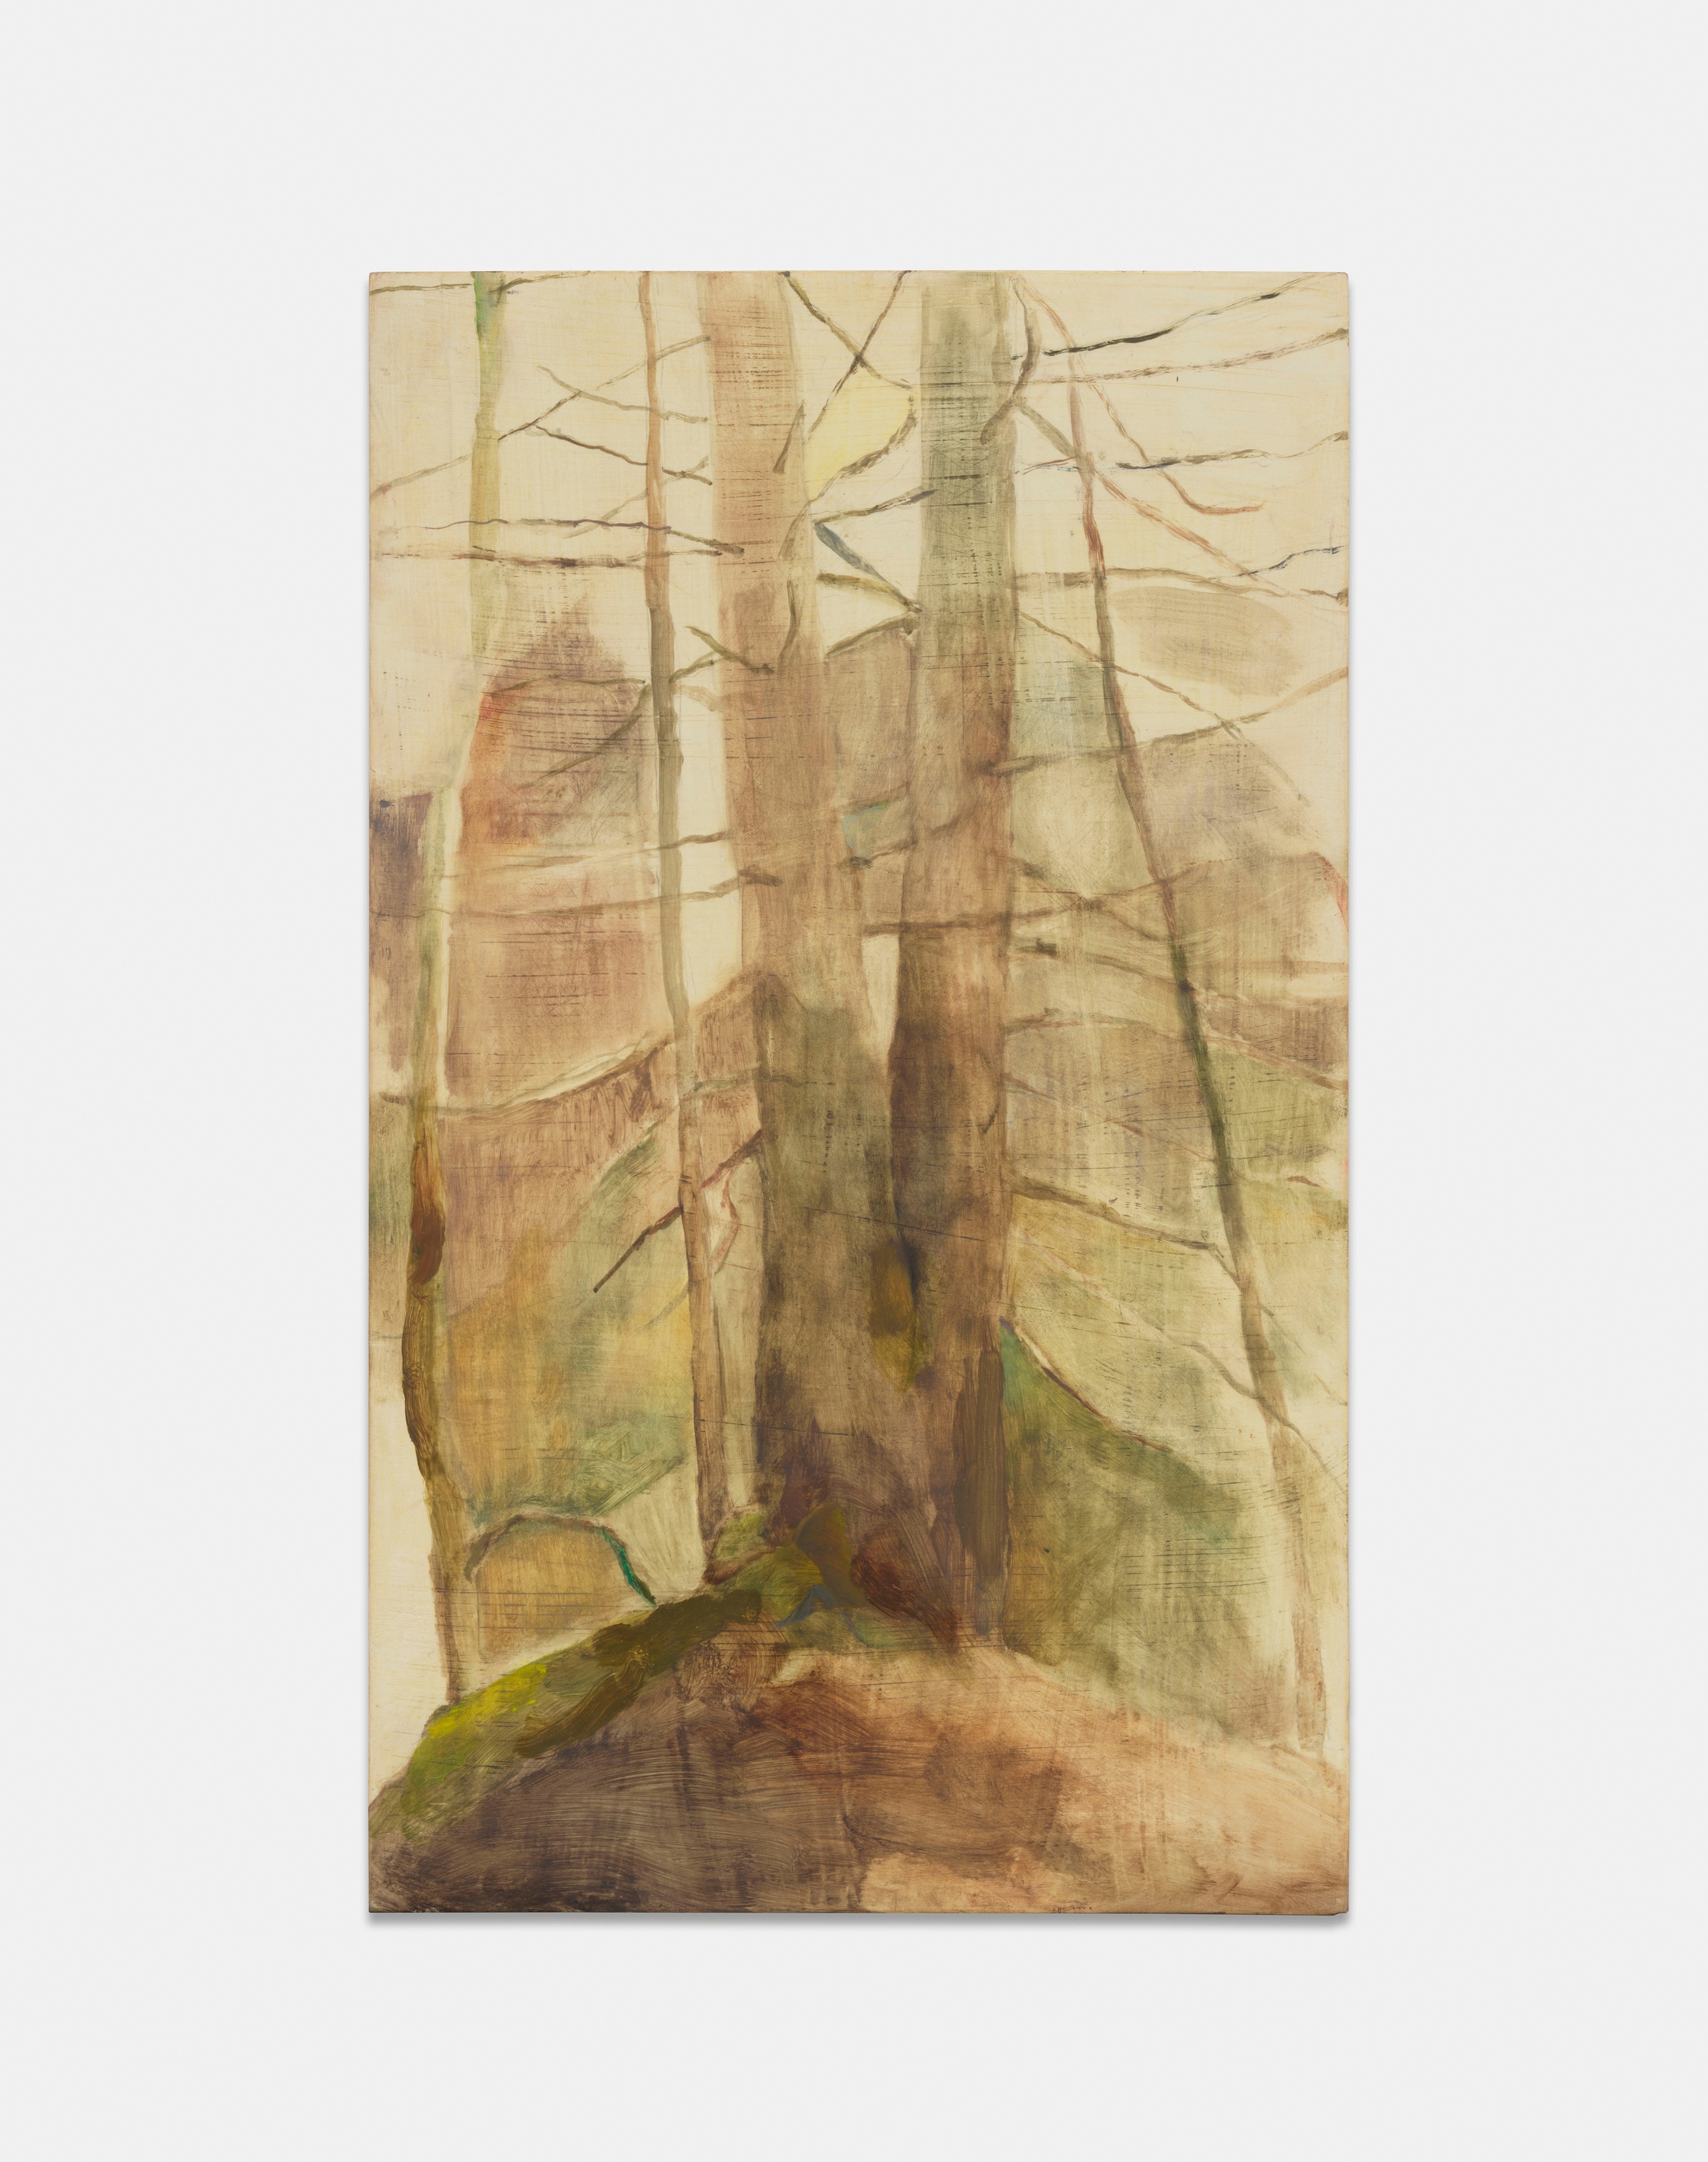 Beaux MendesUntitled, 2023oil and charcoal on half-chalk ground on panel44 x 27.5 cm | 17 1/3 x 10 3/4 in